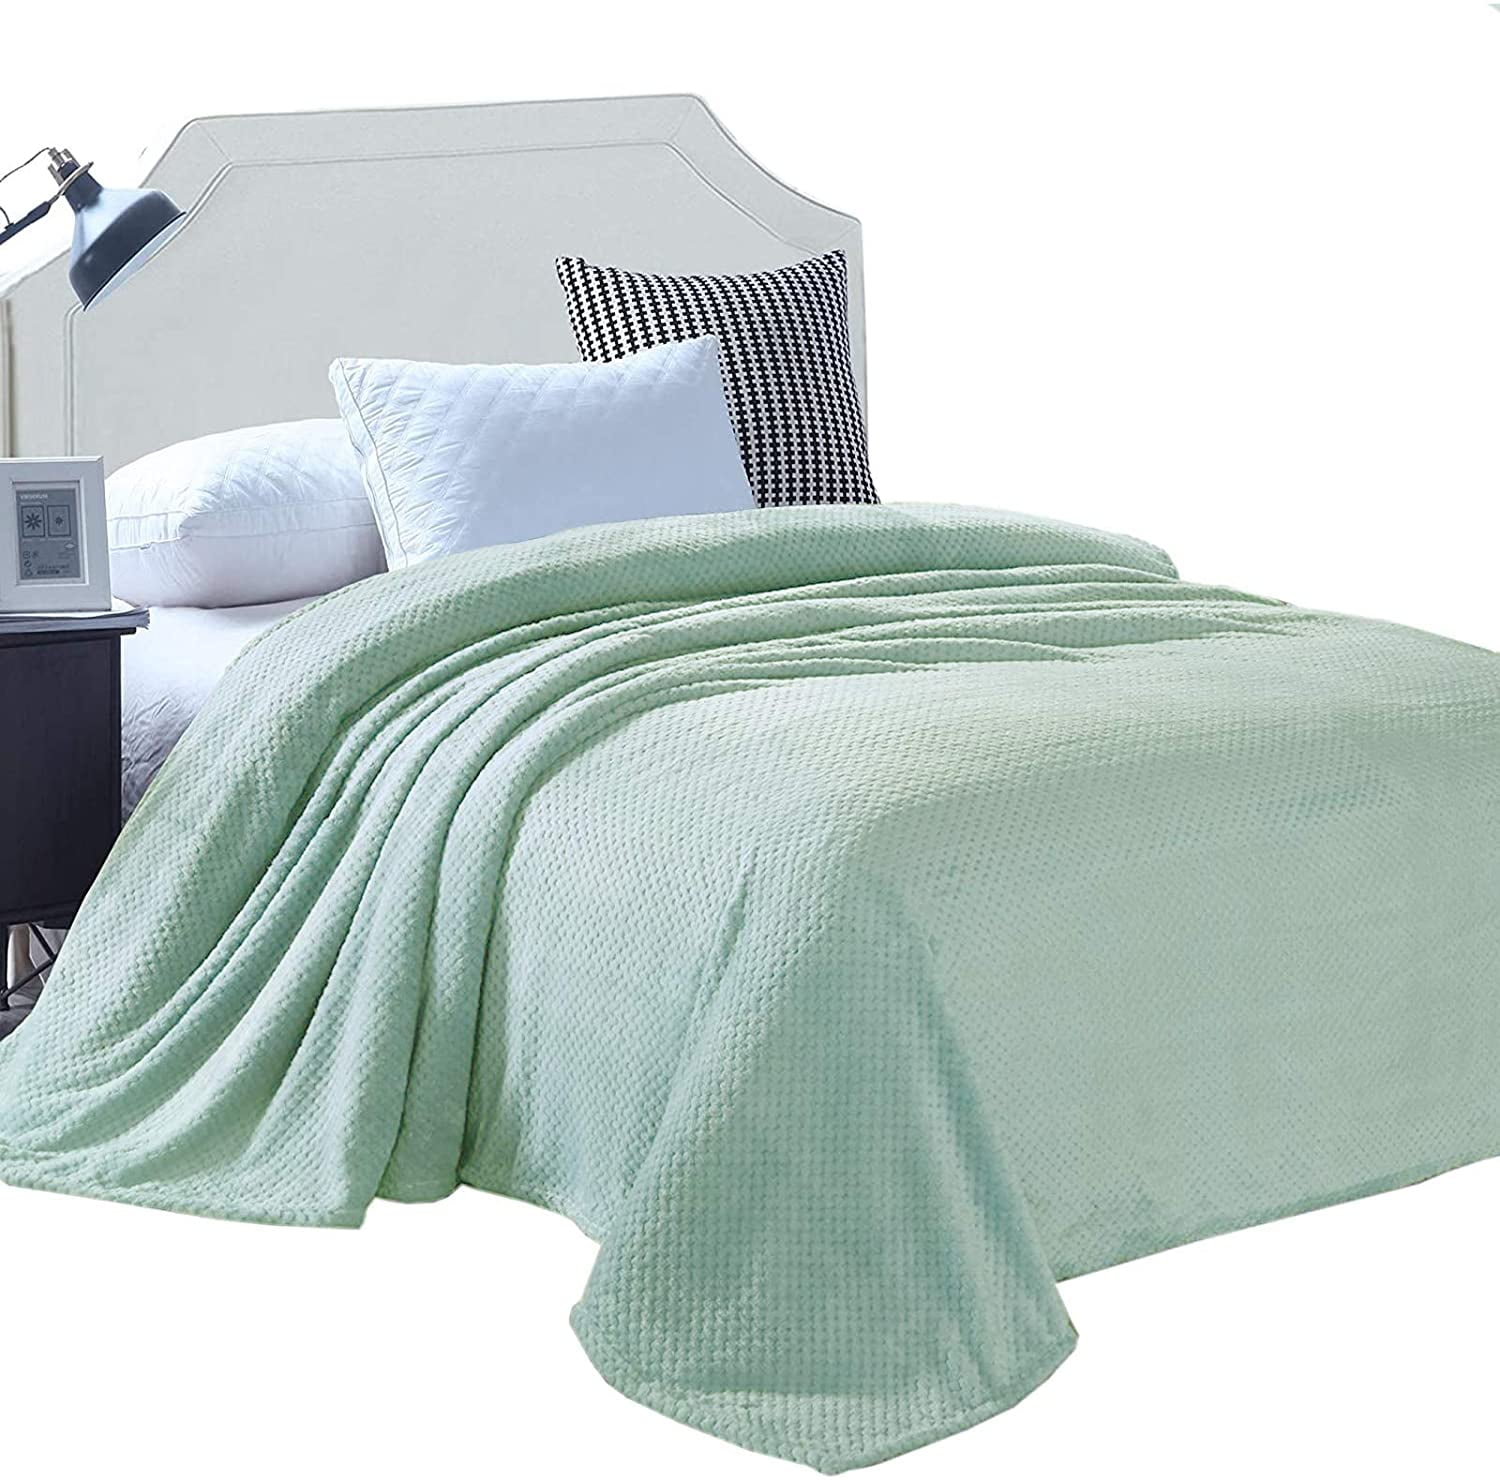 Details about   King Size Soft Blankets Bed Lightweight with Warm Designs Winter Iversized Best 